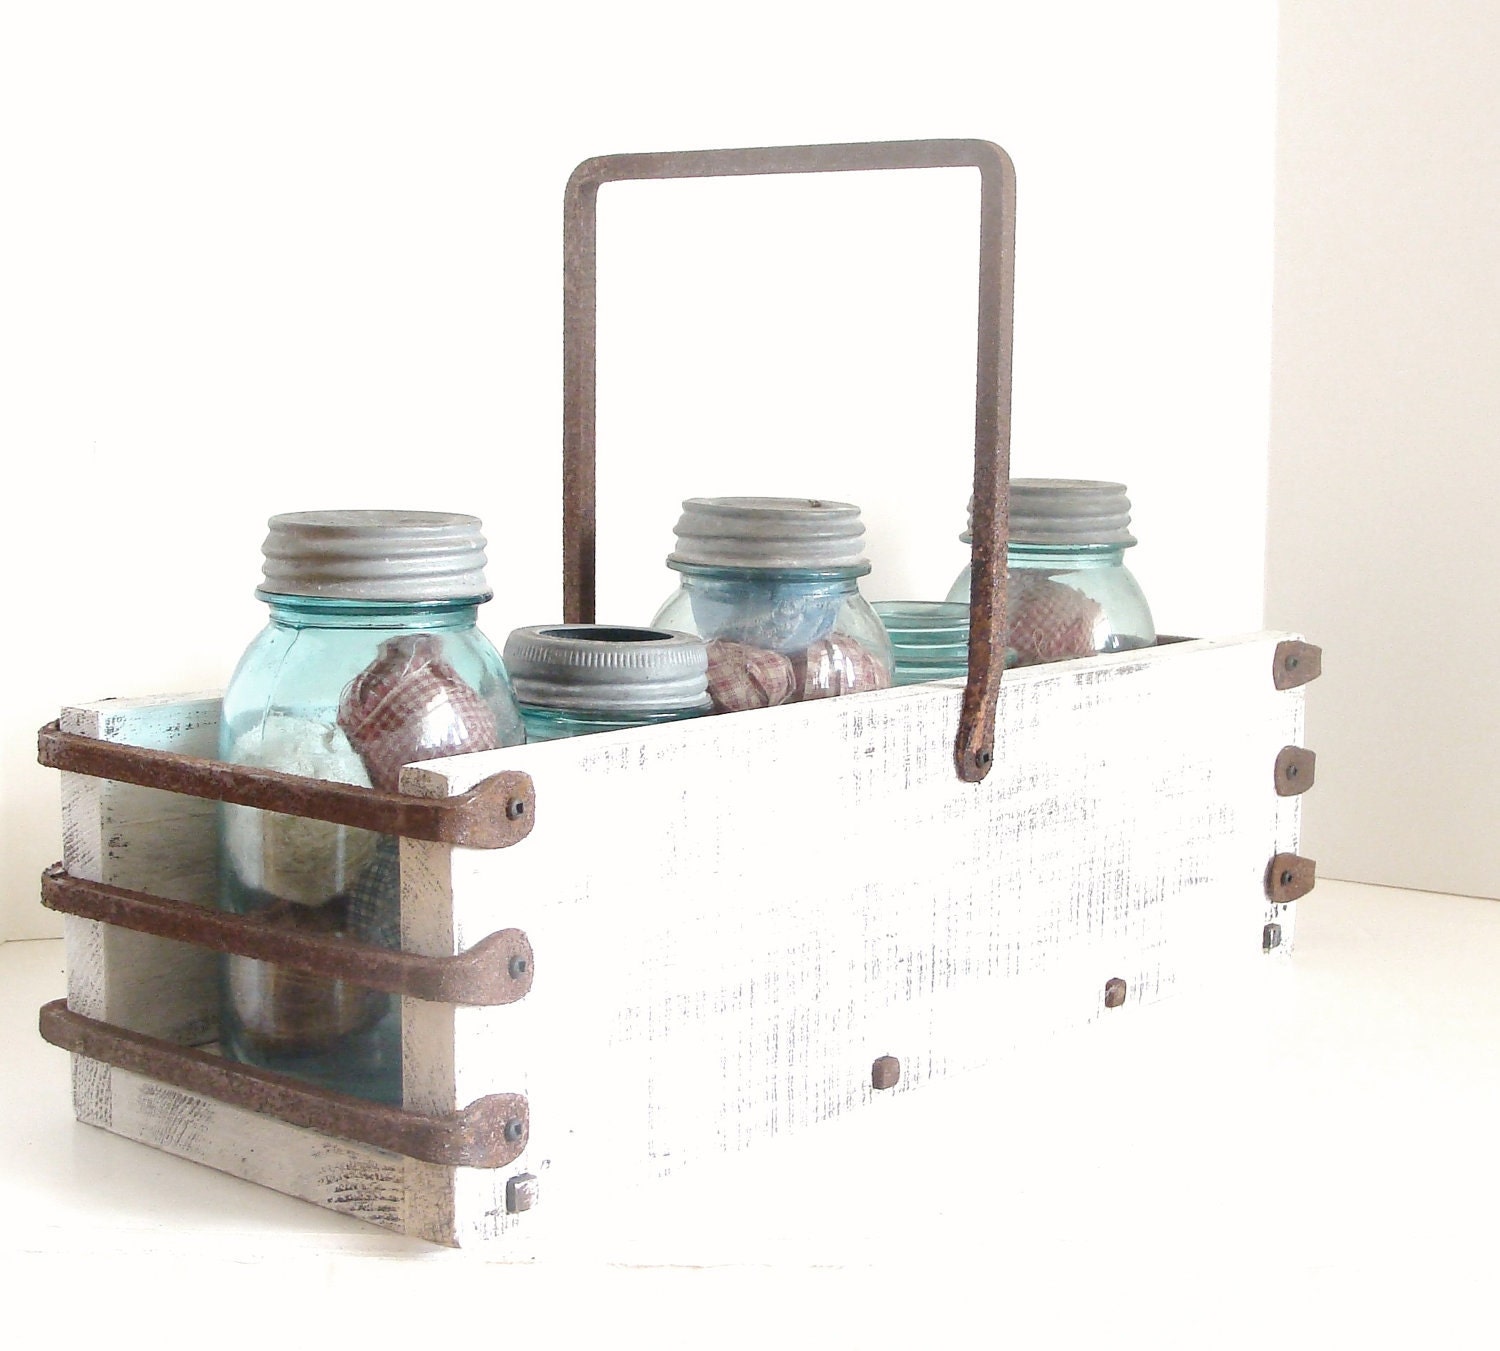 Caddy. Tray. Industrial. Cottage. Weddings. Rustic. White. Iron Handles